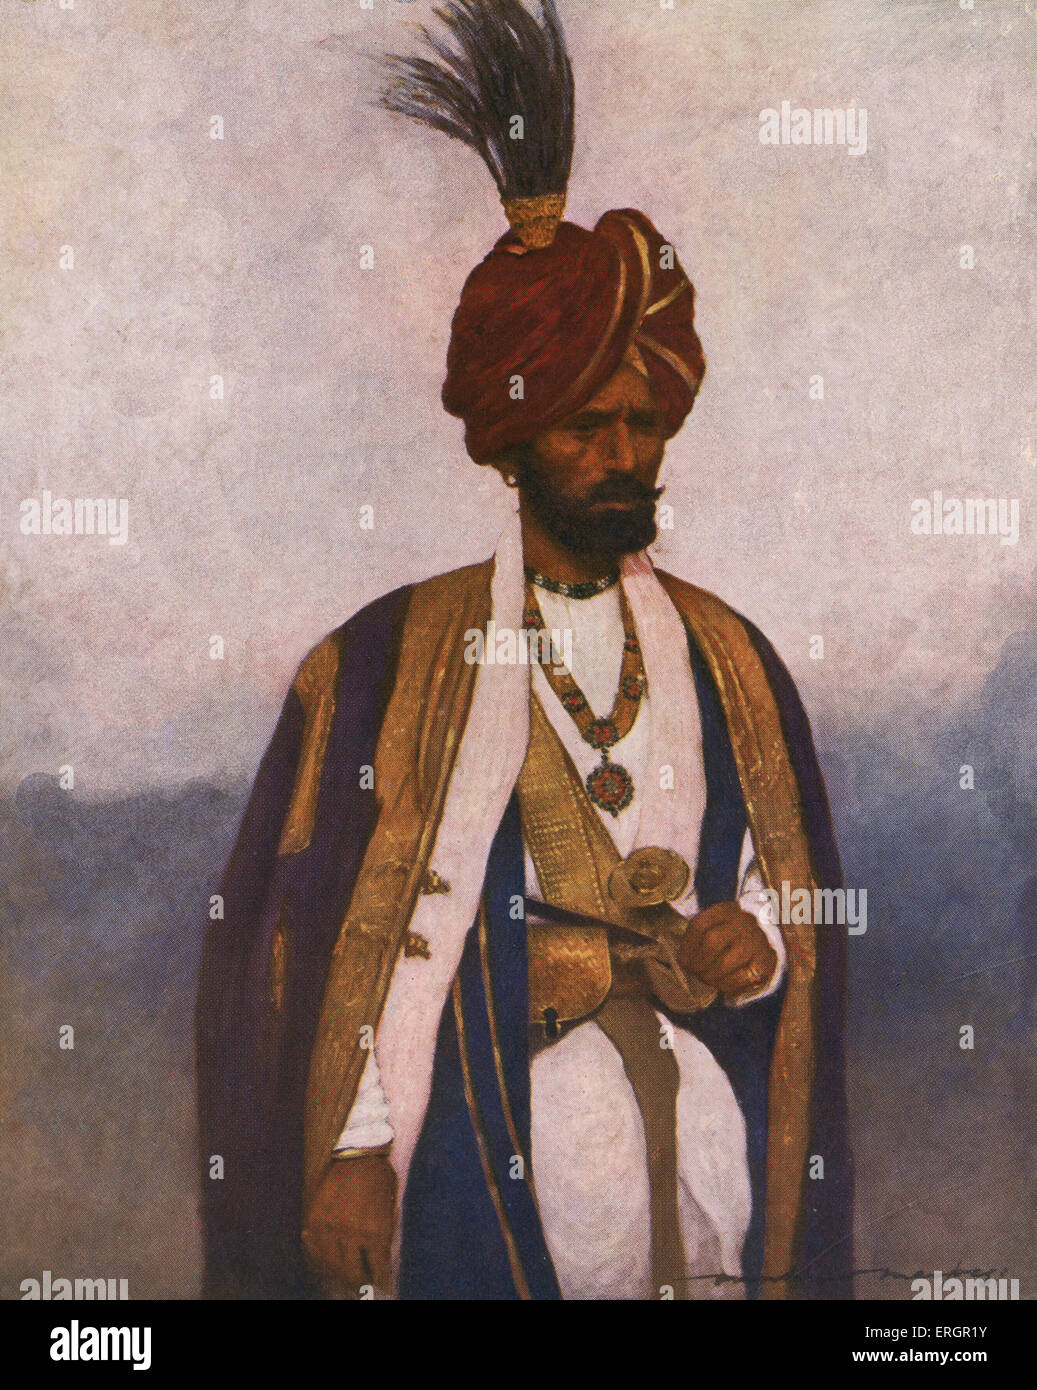 Sowar - a cavalry troop - of the 17th Dogra Regiment, part of the British Indian Army. The soldier wears a lavish purple and Stock Photo